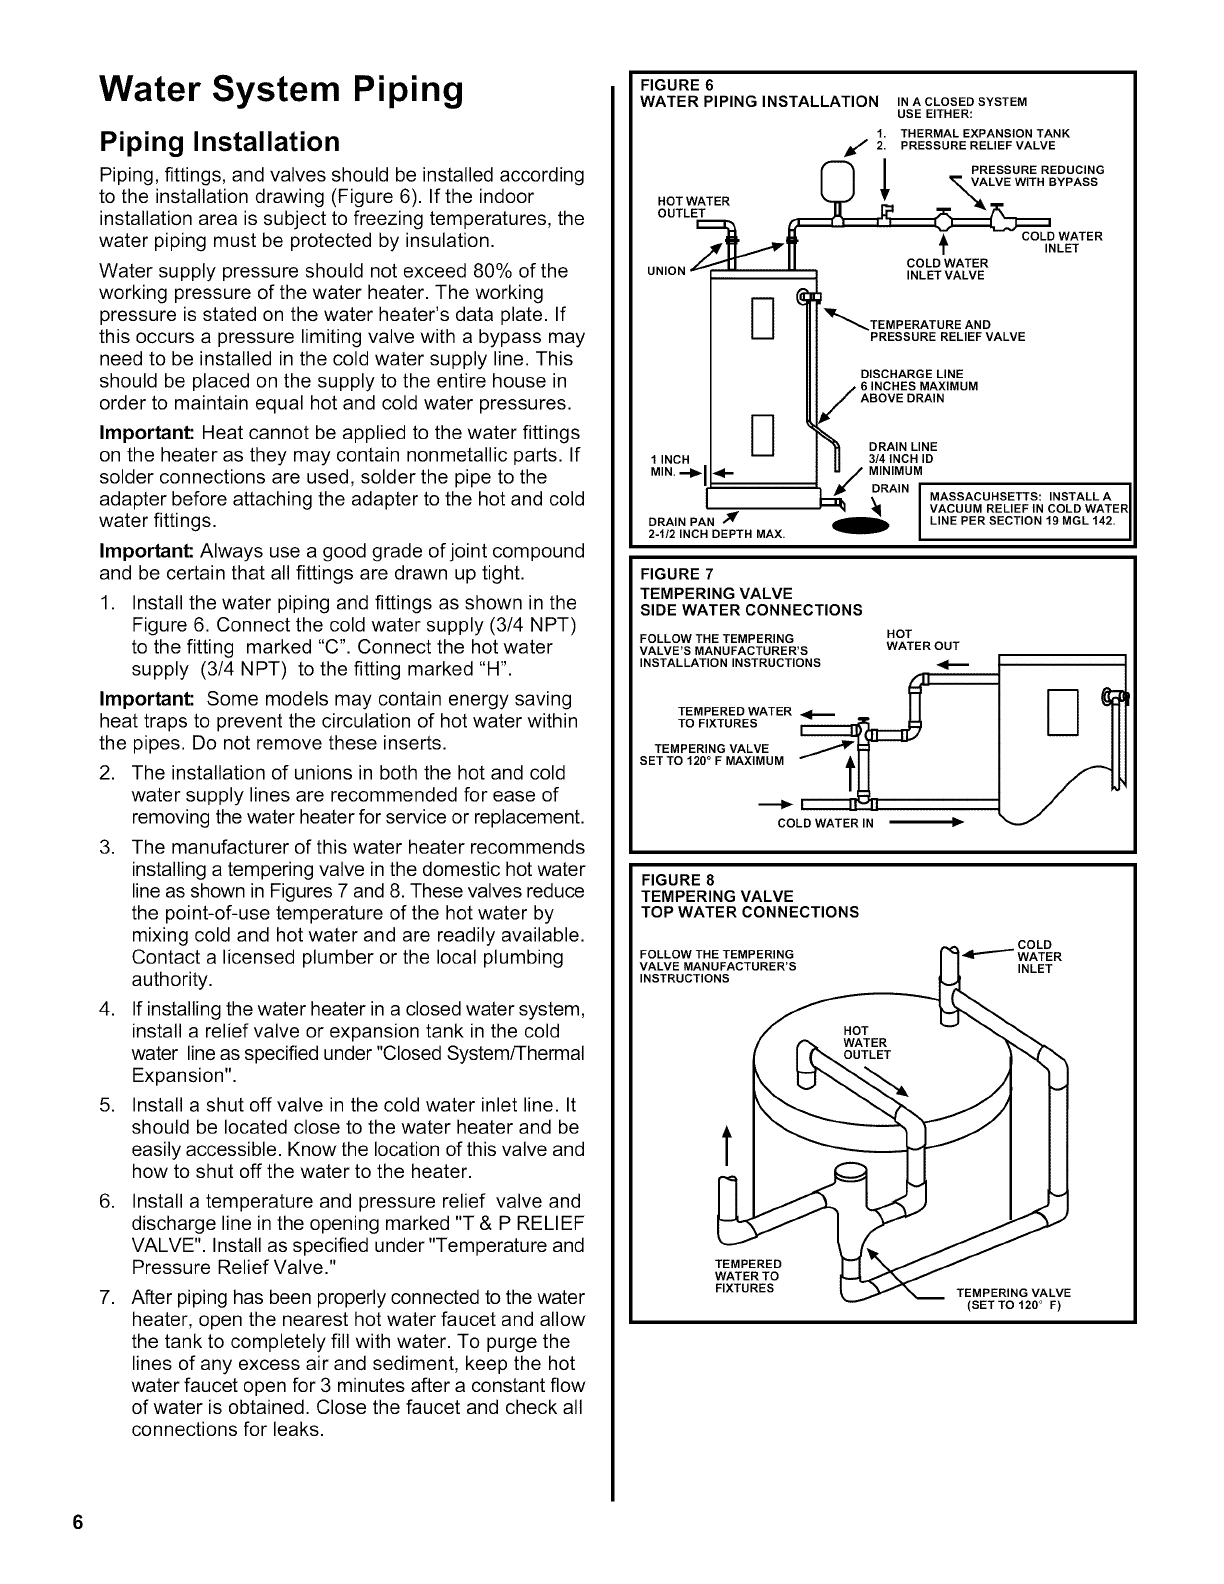 Craftmaster 12 Gallon Hot Water Heater Wiring Diagram from usermanual.wiki